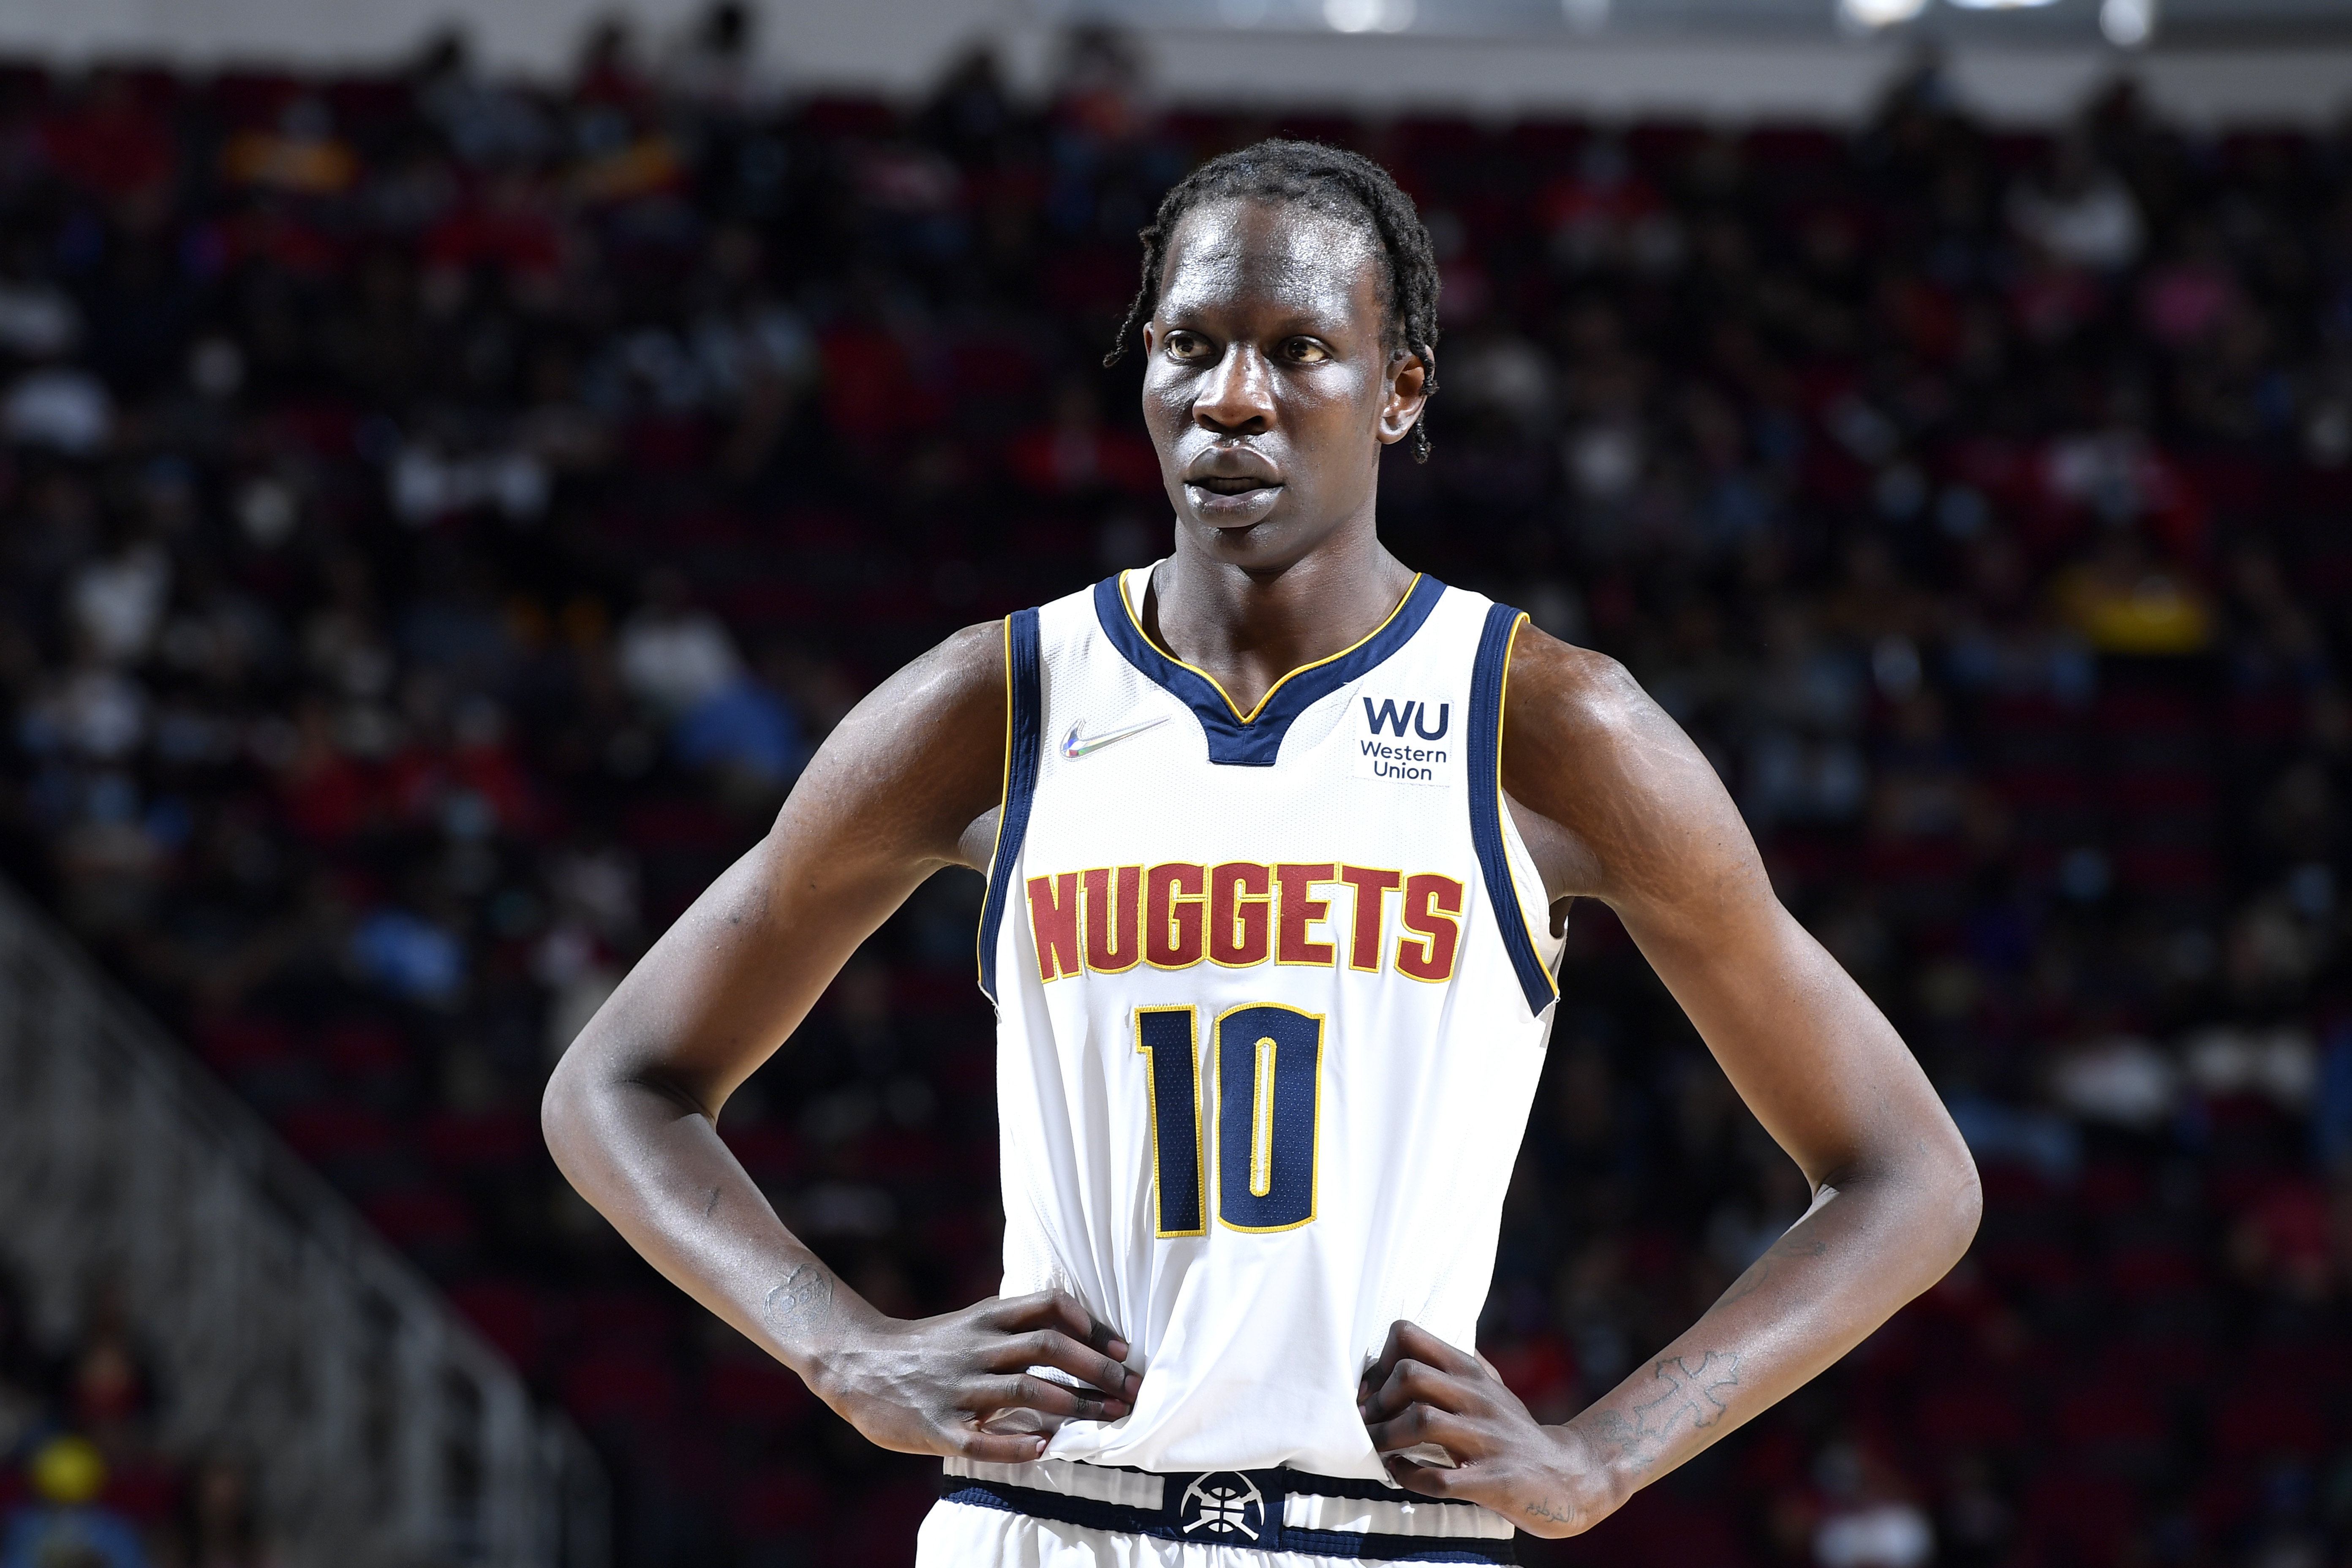 Bol Bol #10 of the Denver Nuggets looks on during the game against the Houston Rockets on January 1, 2022 at the Toyota Center in Houston, Texas.